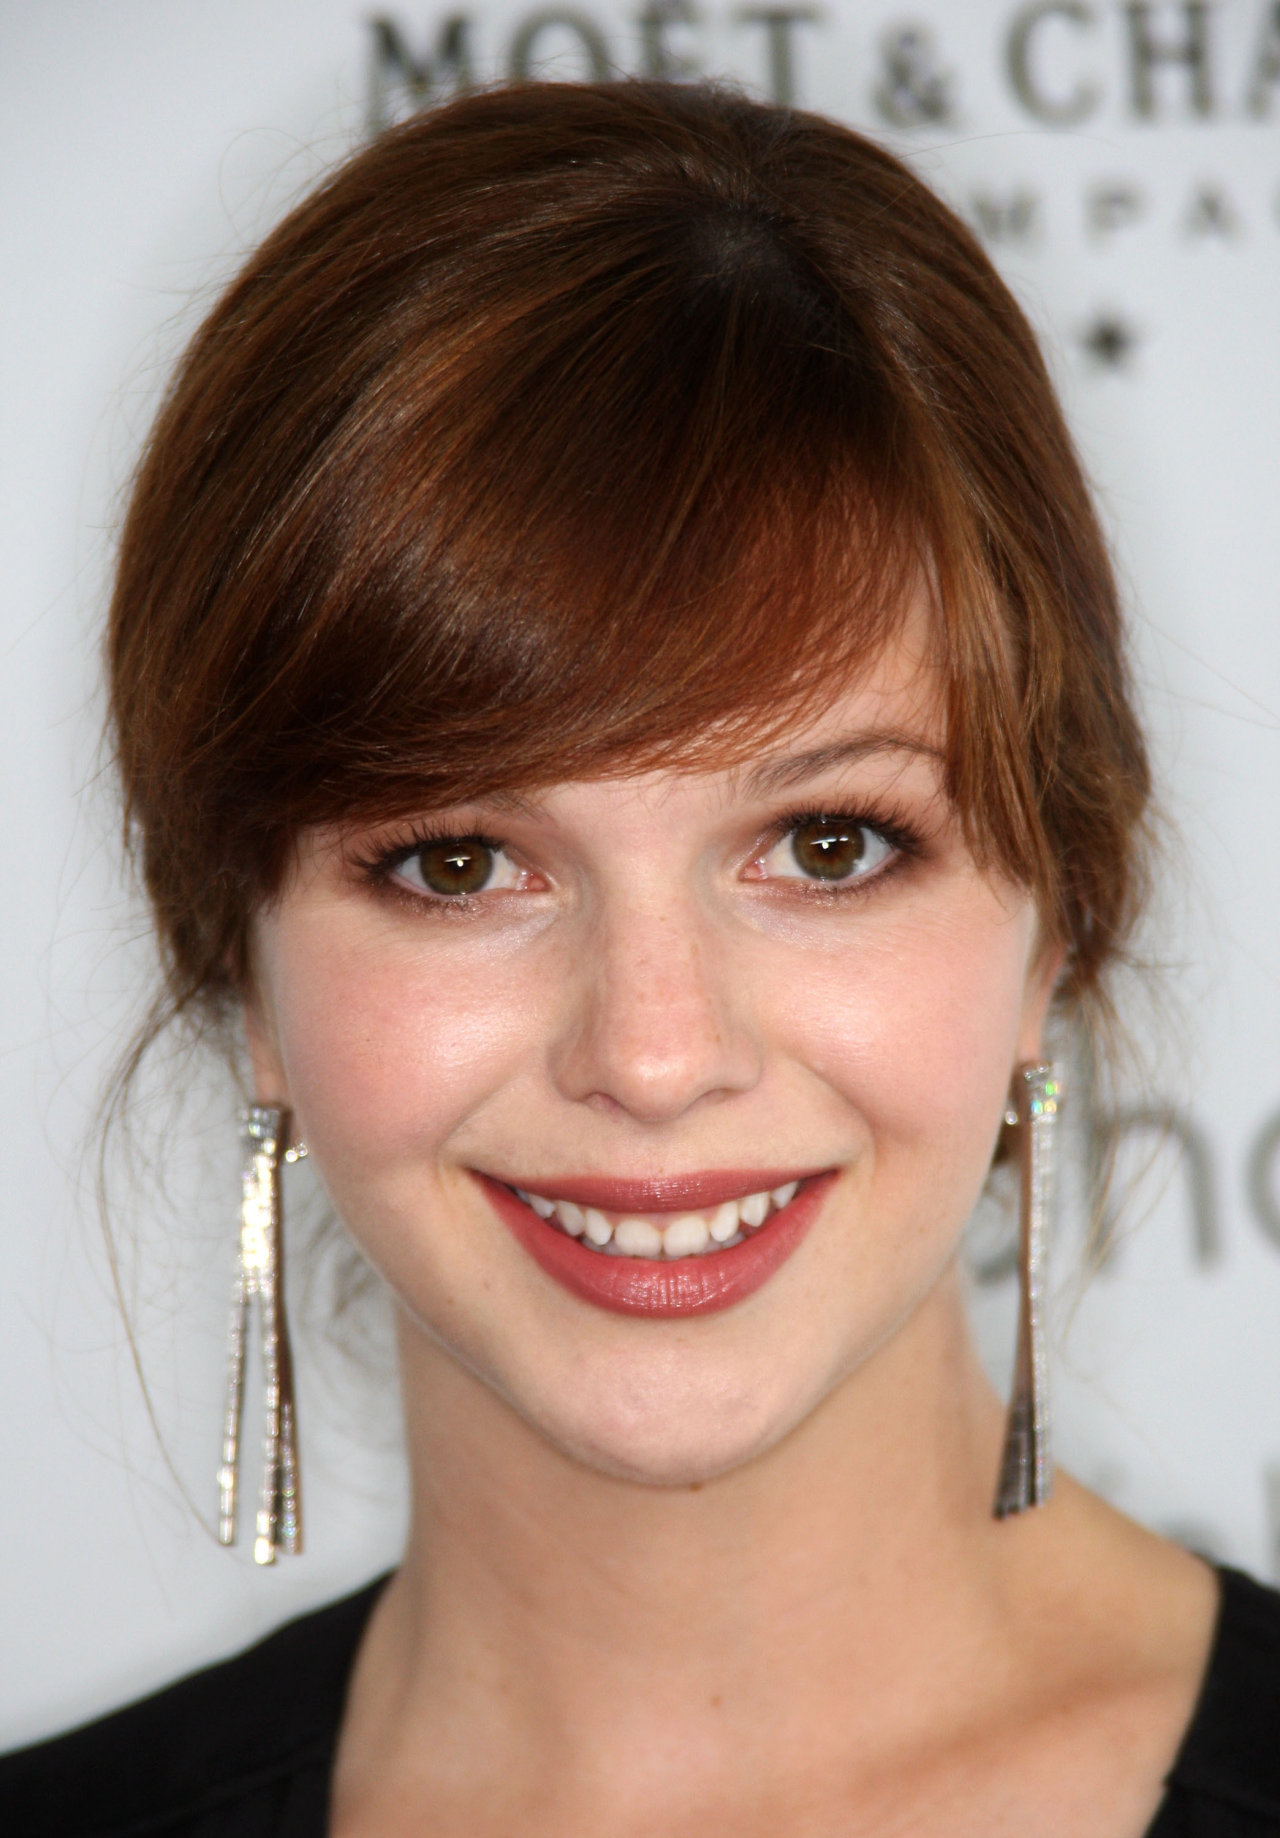 Amber Tamblyn leaked wallpapers